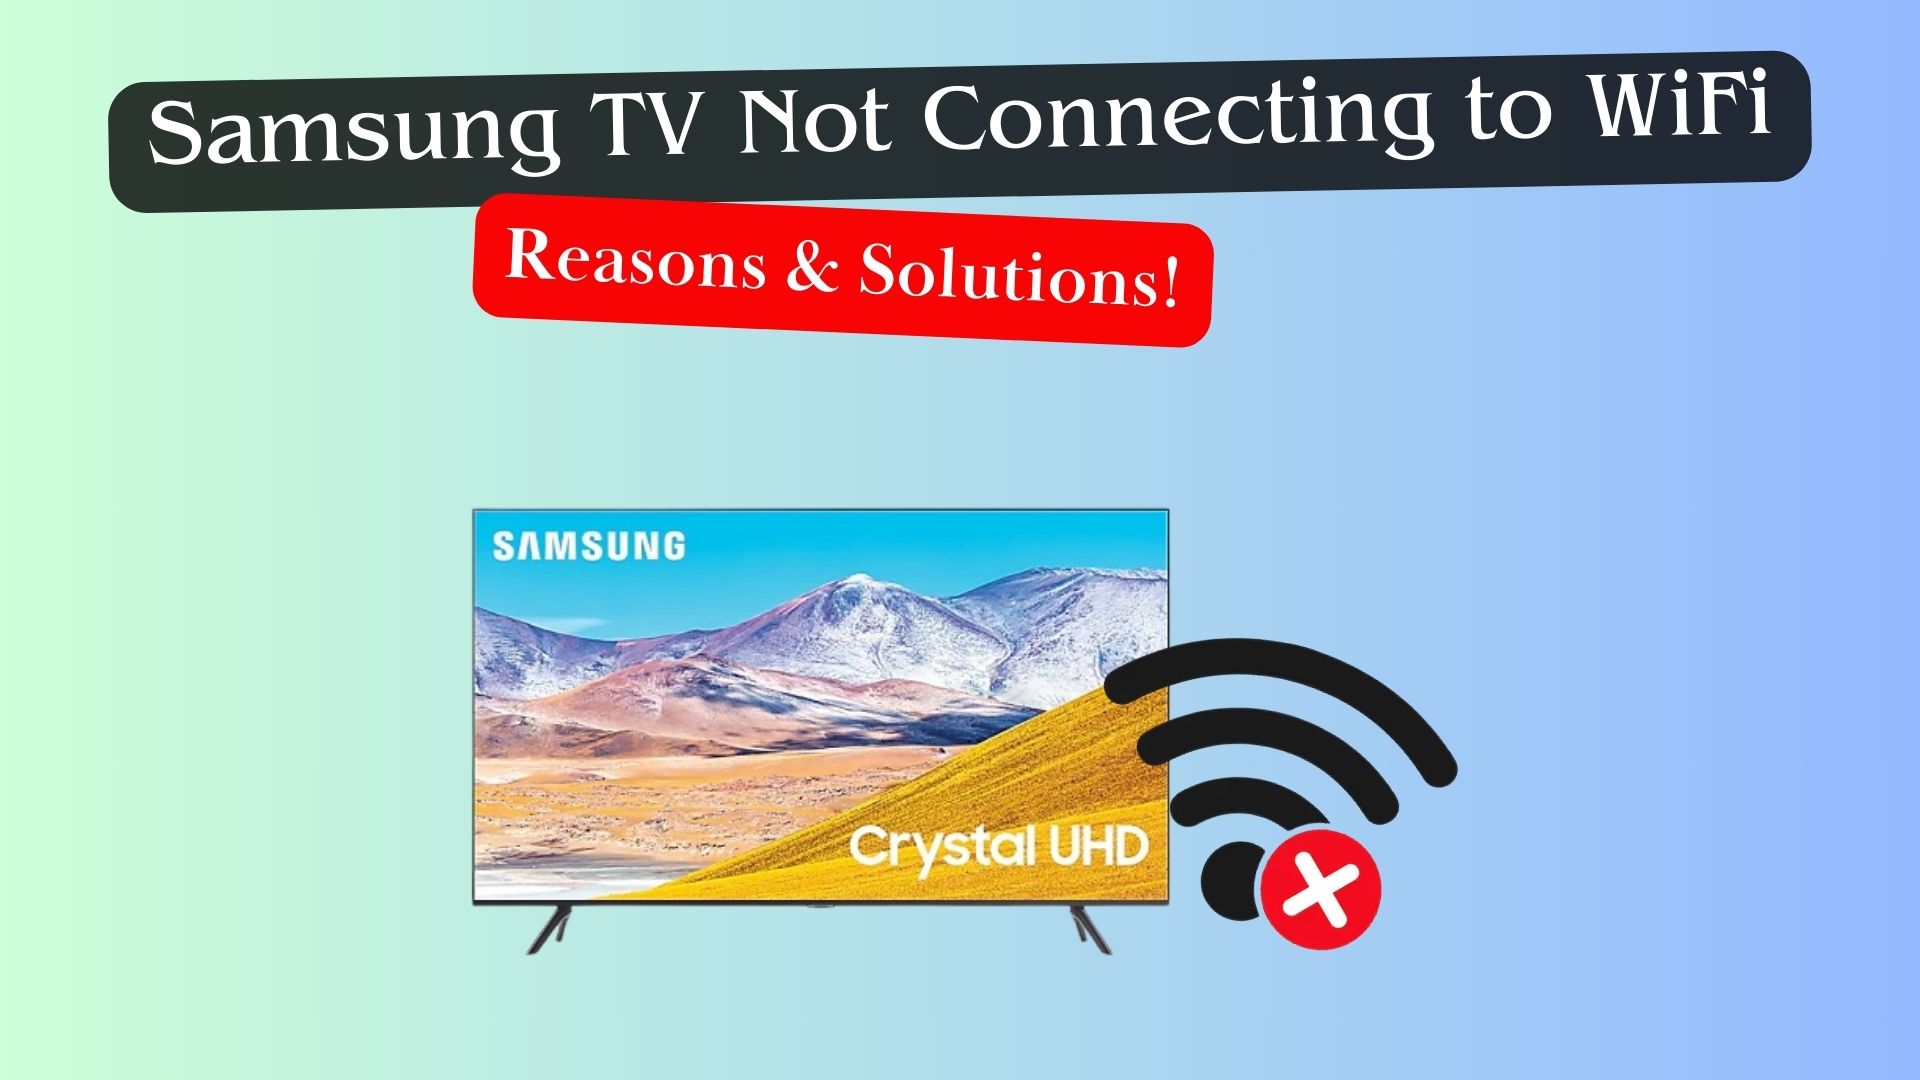 Samsung TV Not Connecting to WiFi: Reasons & Solutions!